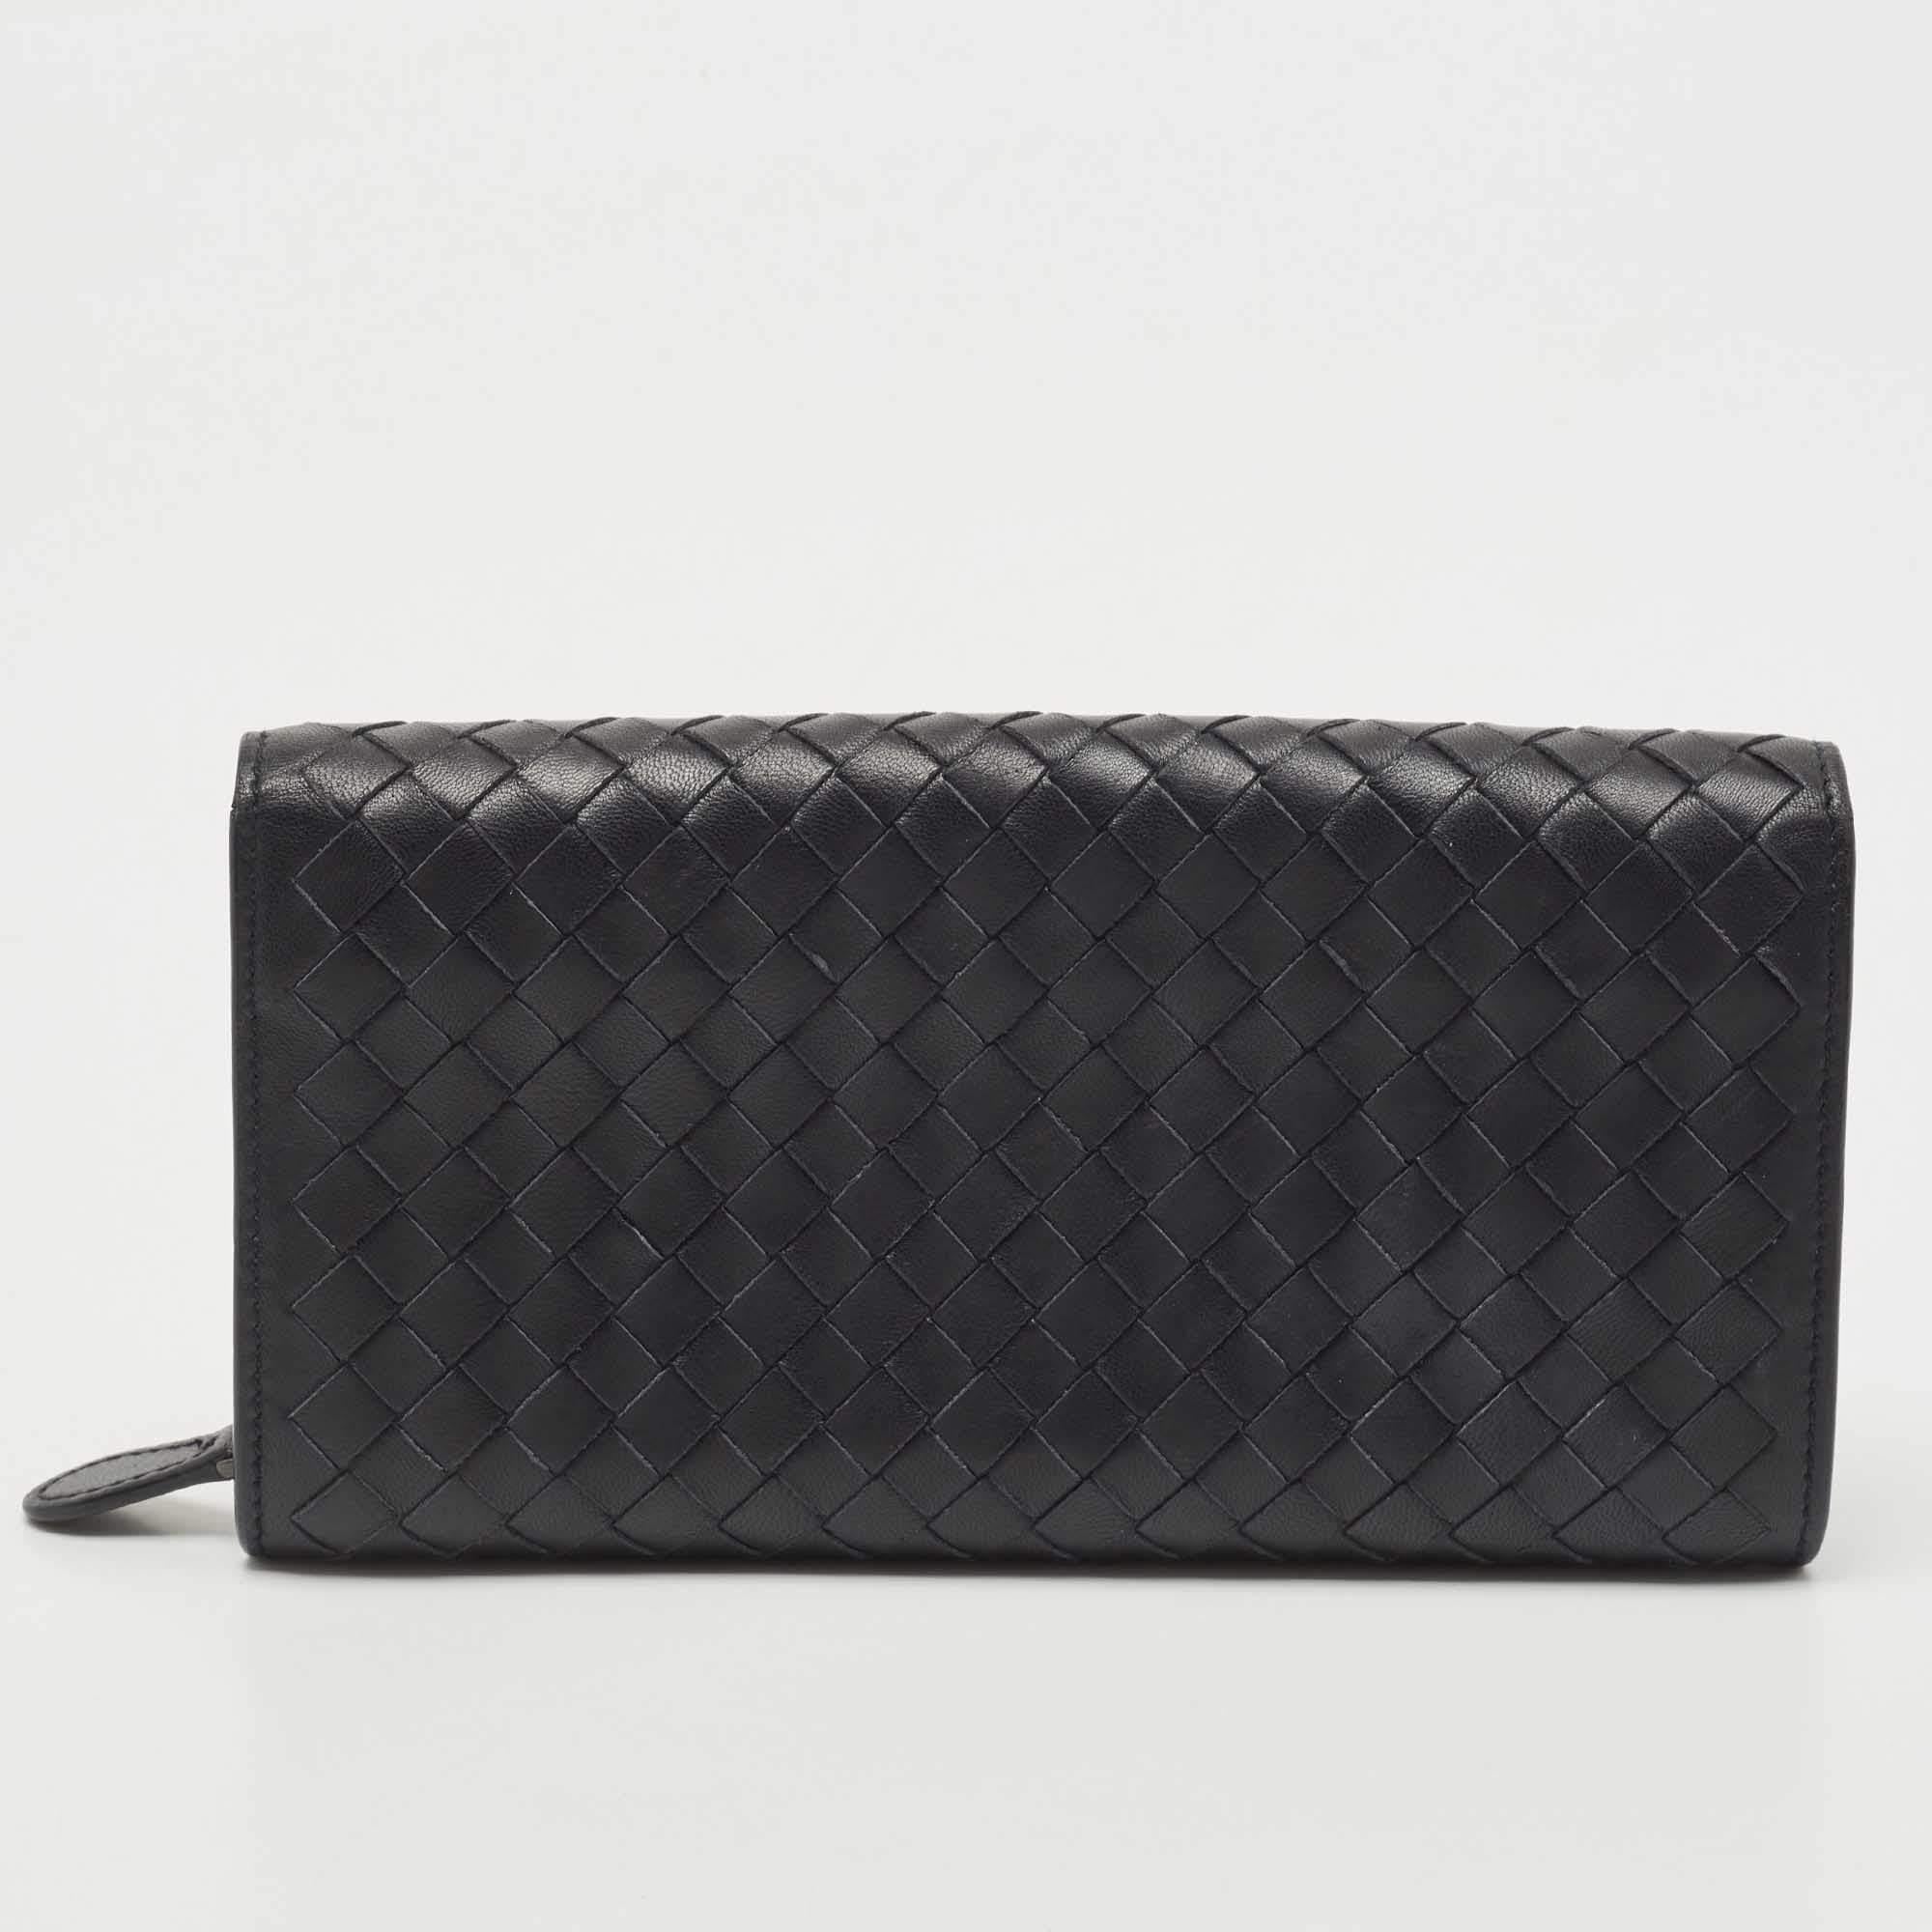 This Bvlgari continental wallet designed is a luxurious accessory that will prove to be super functional. It is made using durable materials on the exterior and unveils a well-organized interior.

Includes: Original Dustbag

